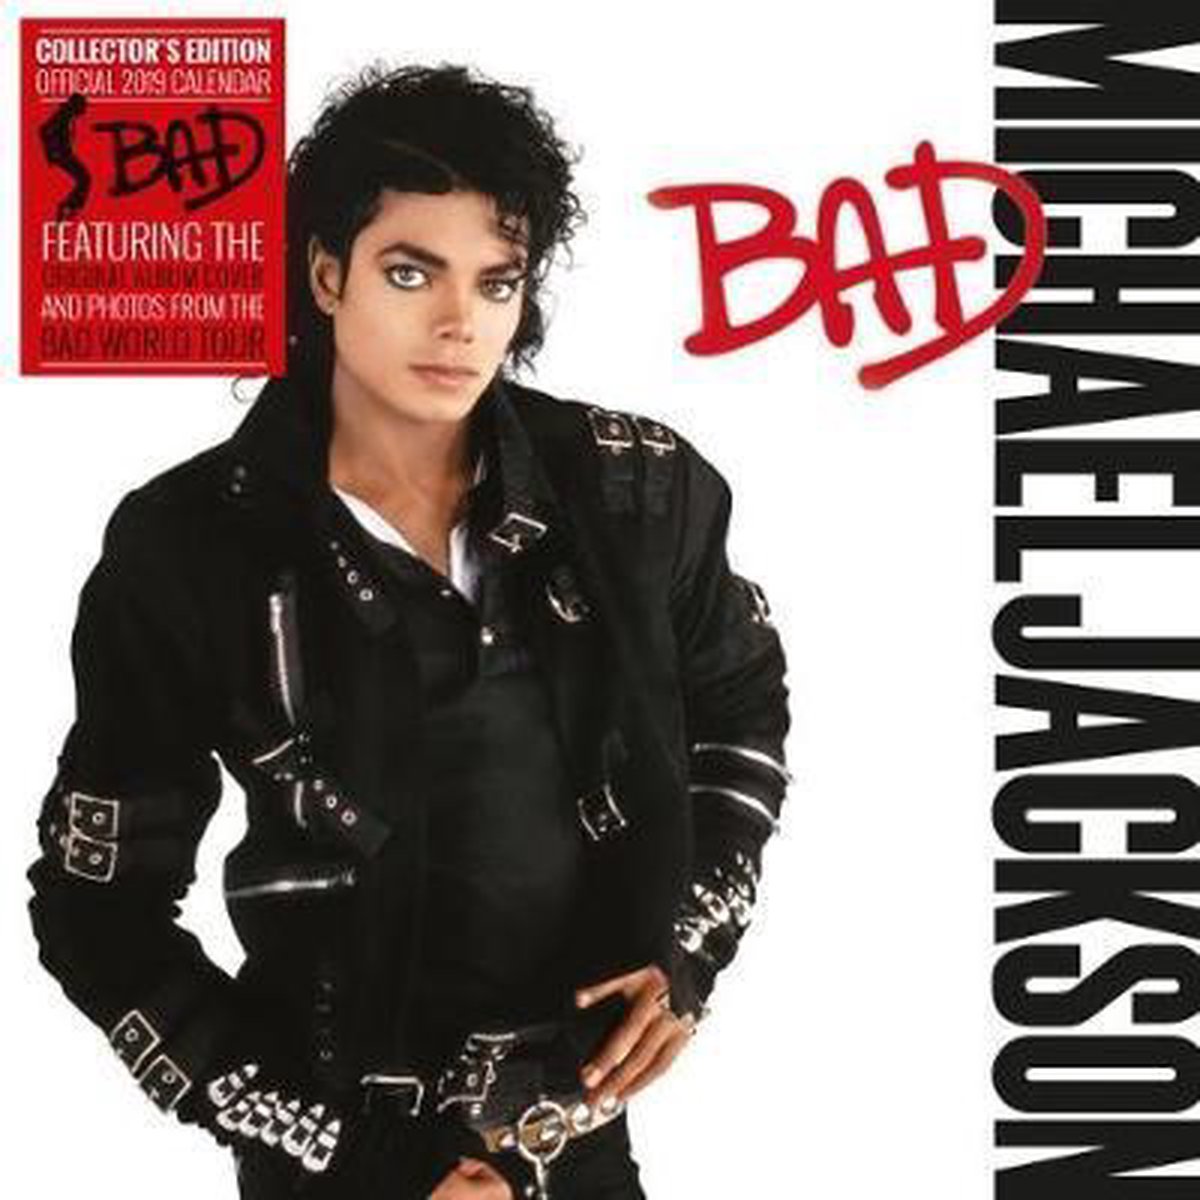 Michael Jackson Collectors Edition Kalender 2019 Record Sleeve Cover